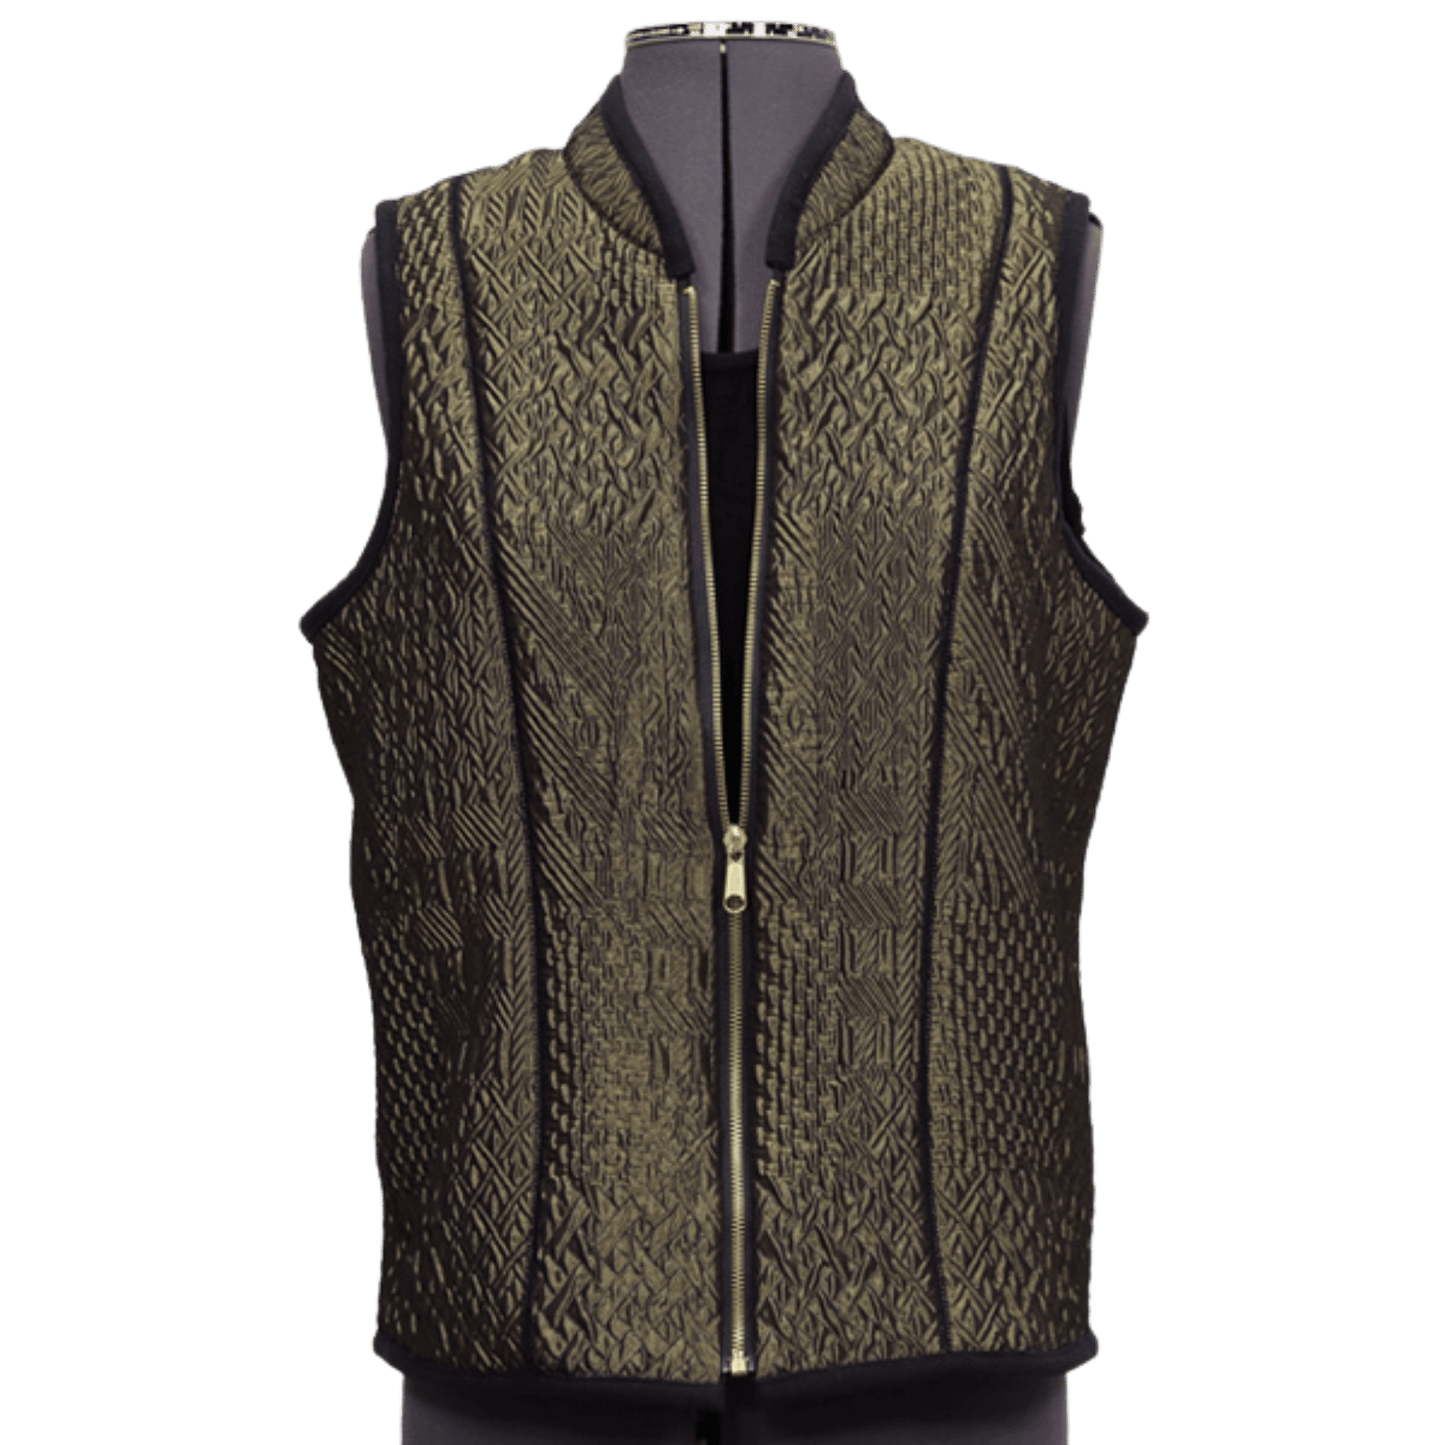 A sleeveless olive green vest on a mannequin